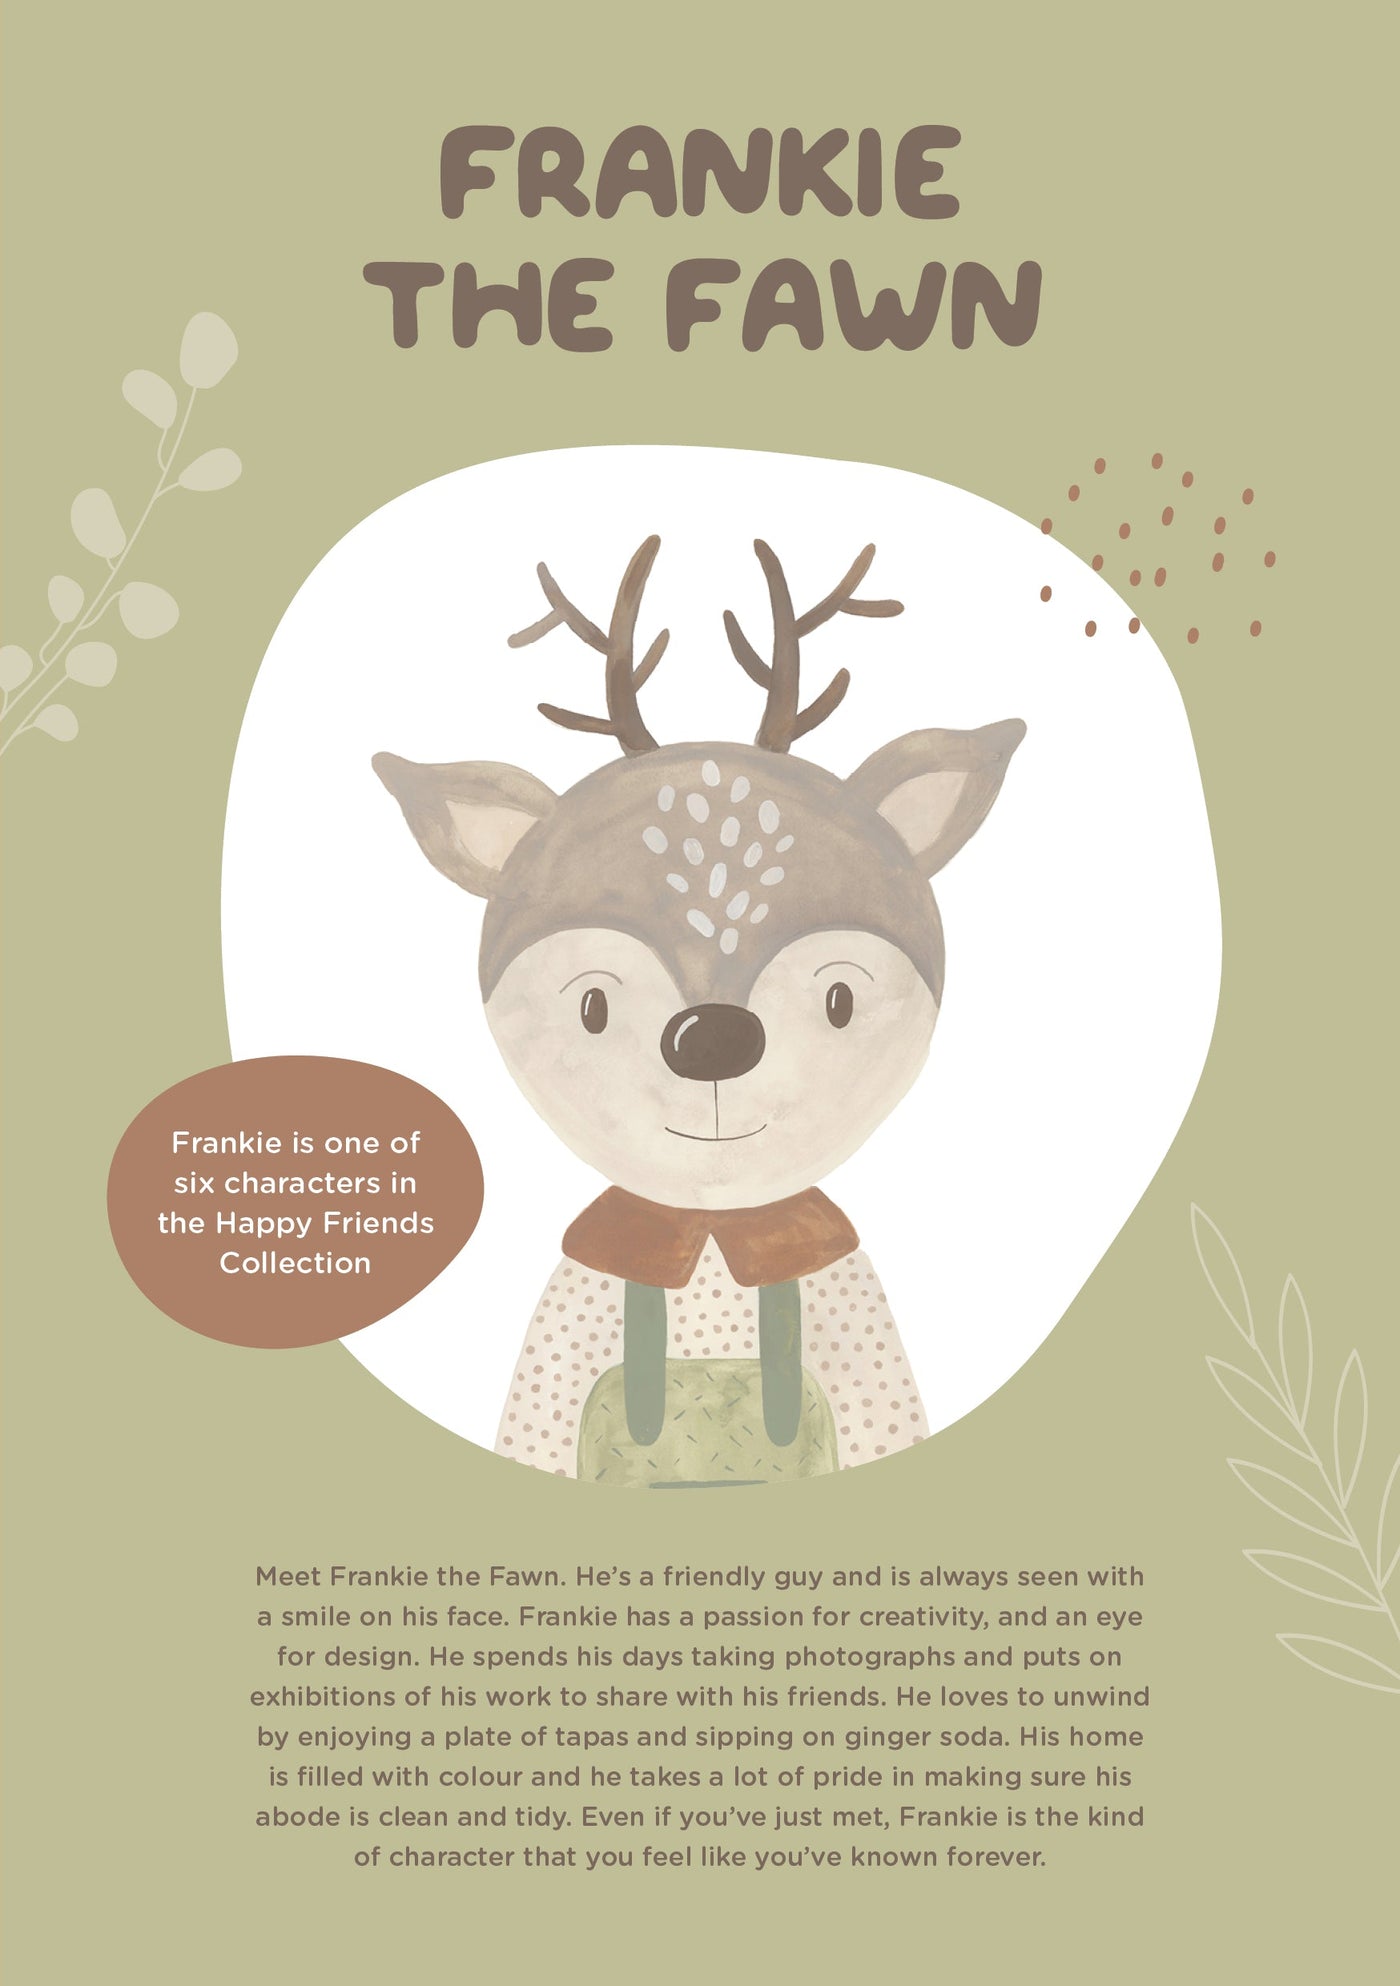 Frankie the Fawn